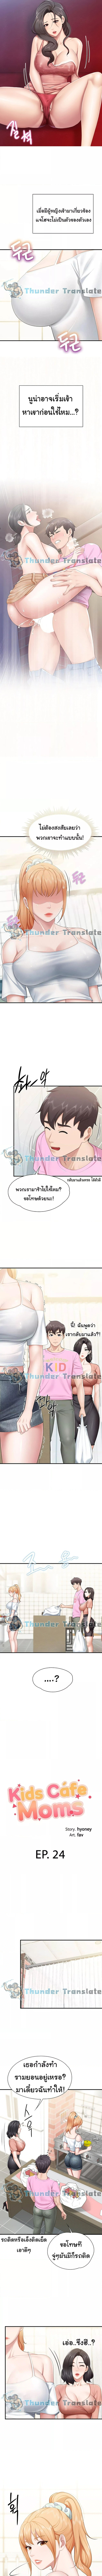 Welcome To Kids Cafe’ 24 ภาพ 0